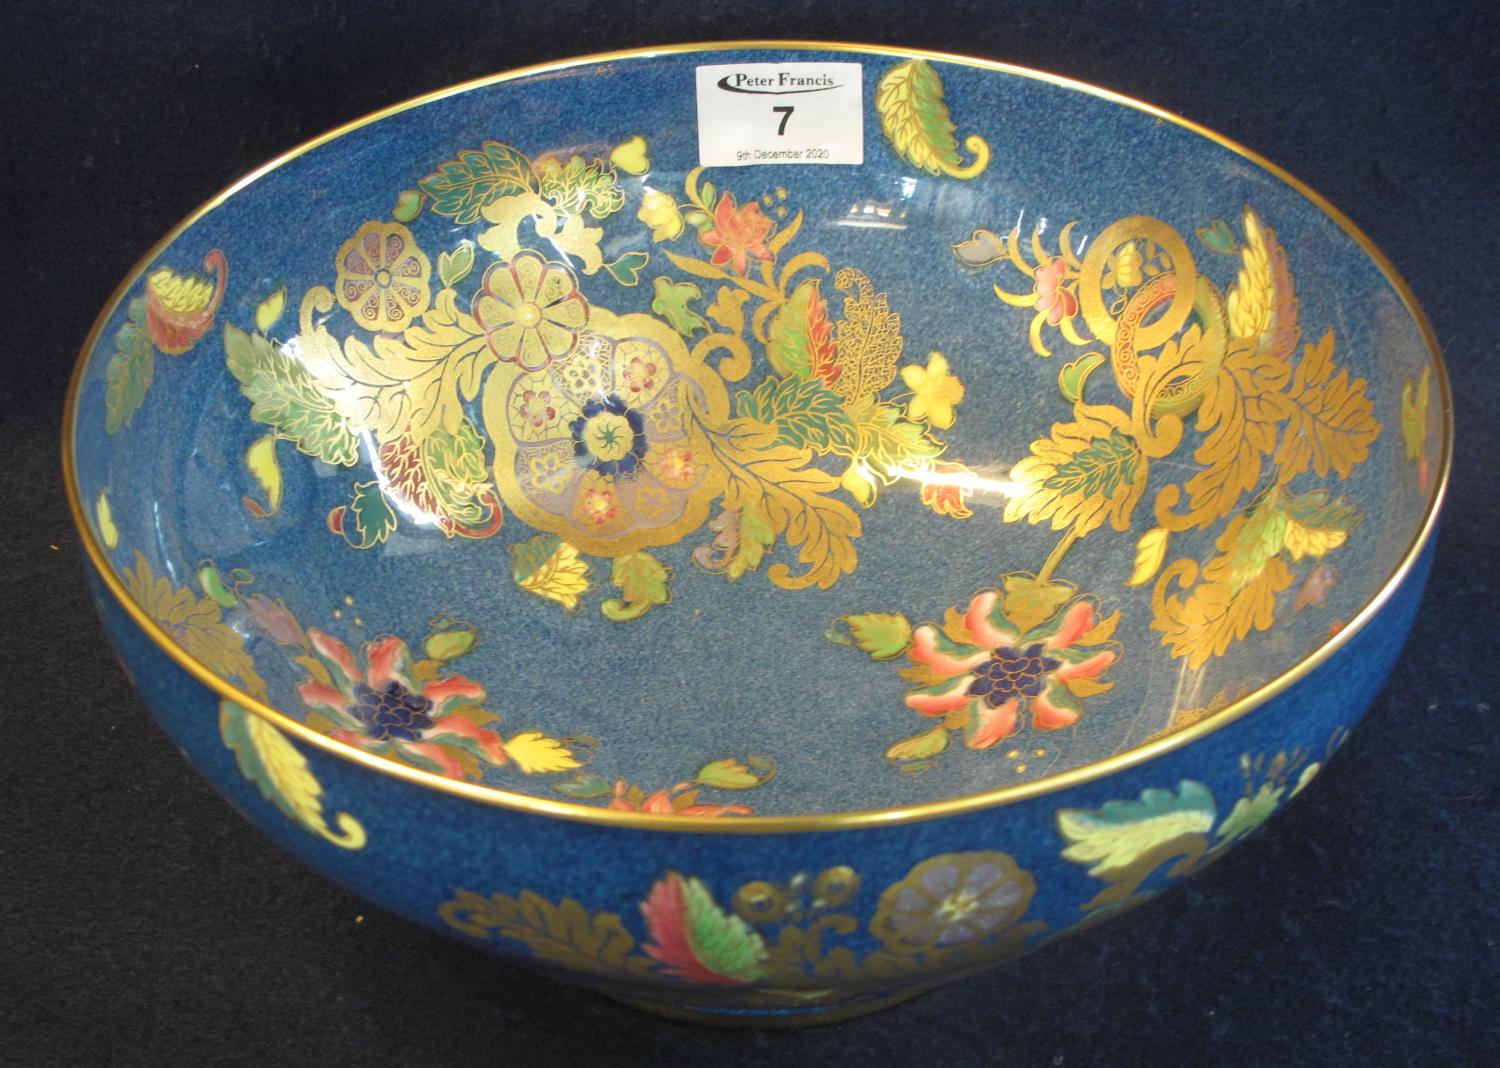 Spode bone china fruit bowl overall decorated with gilded foliate designs on a mottled blue